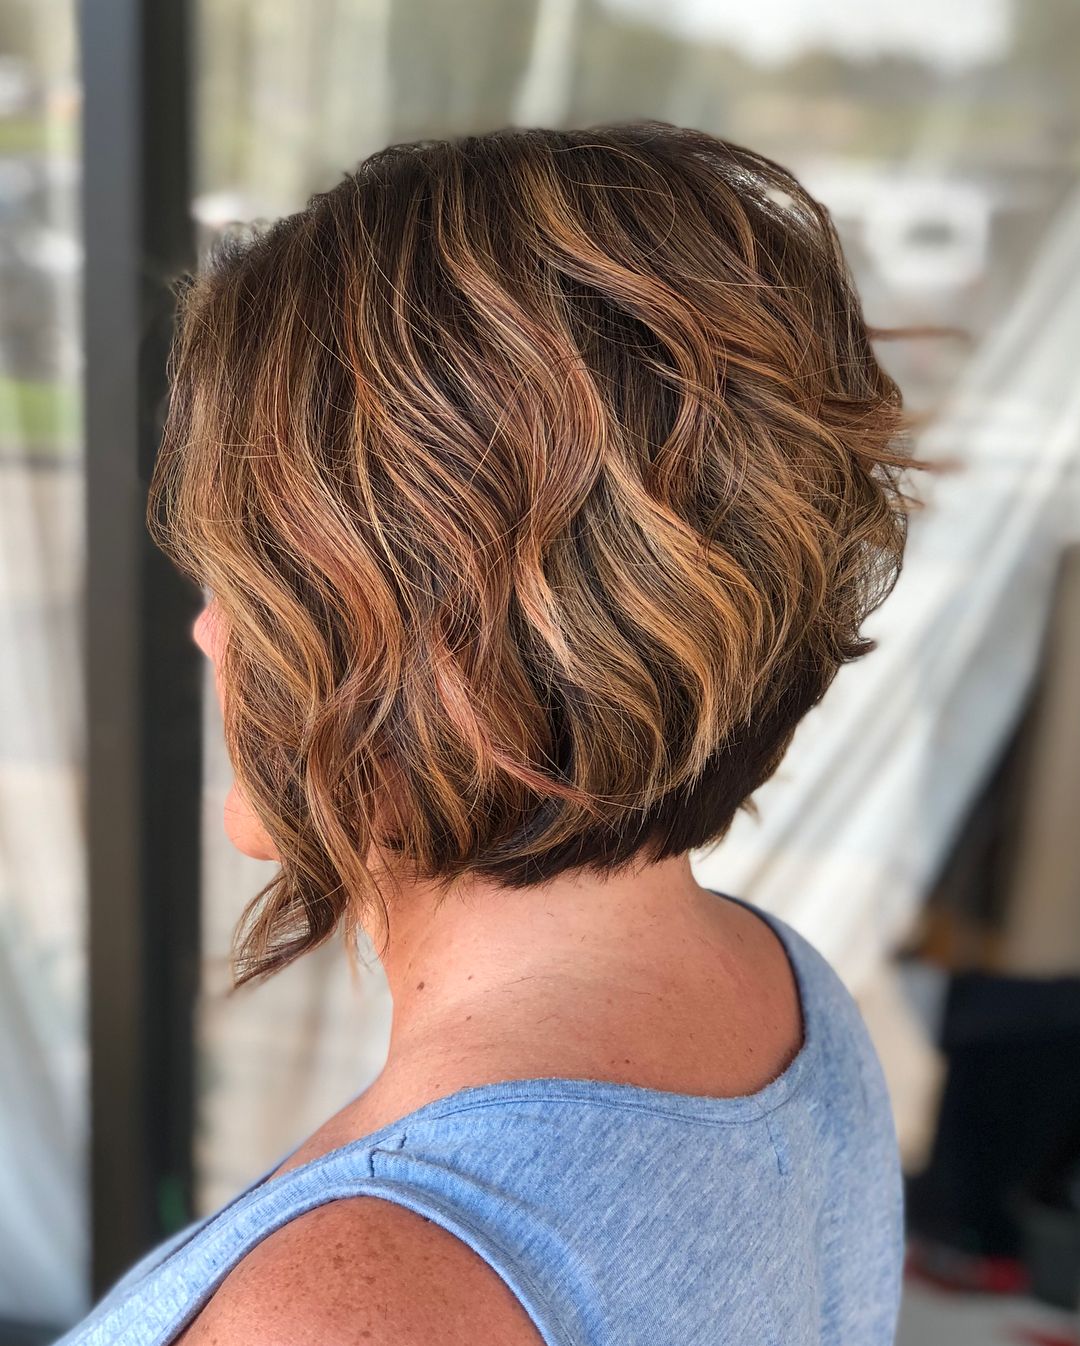 28 Best Stacked Bob Haircuts You’ll See This Year